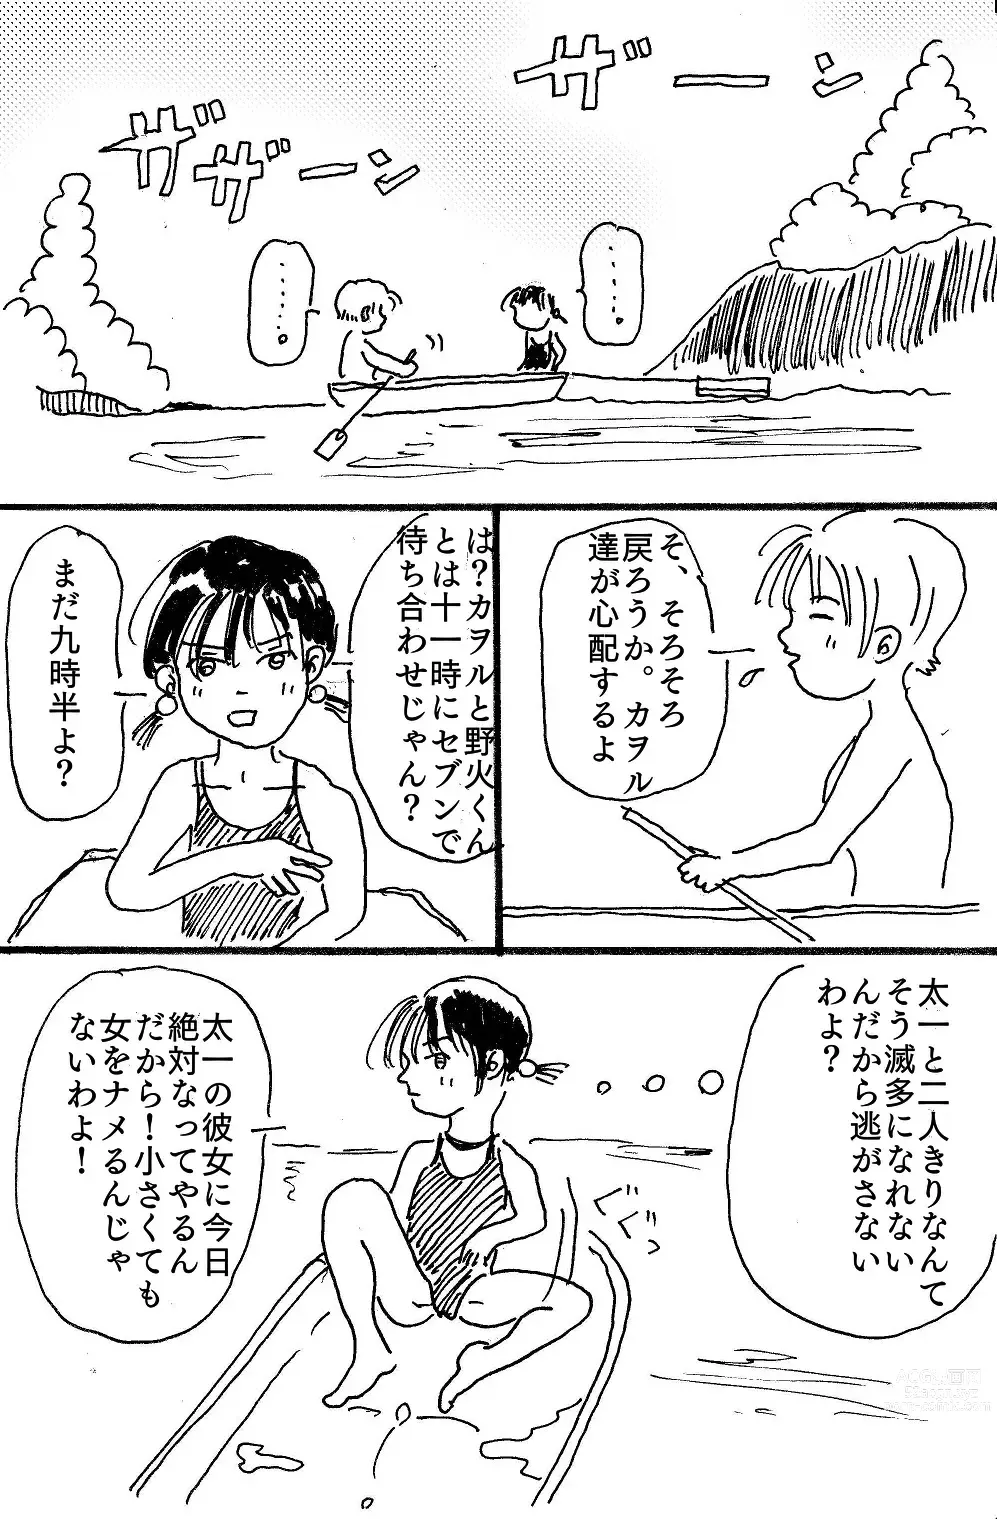 Page 9 of doujinshi 映子と太一